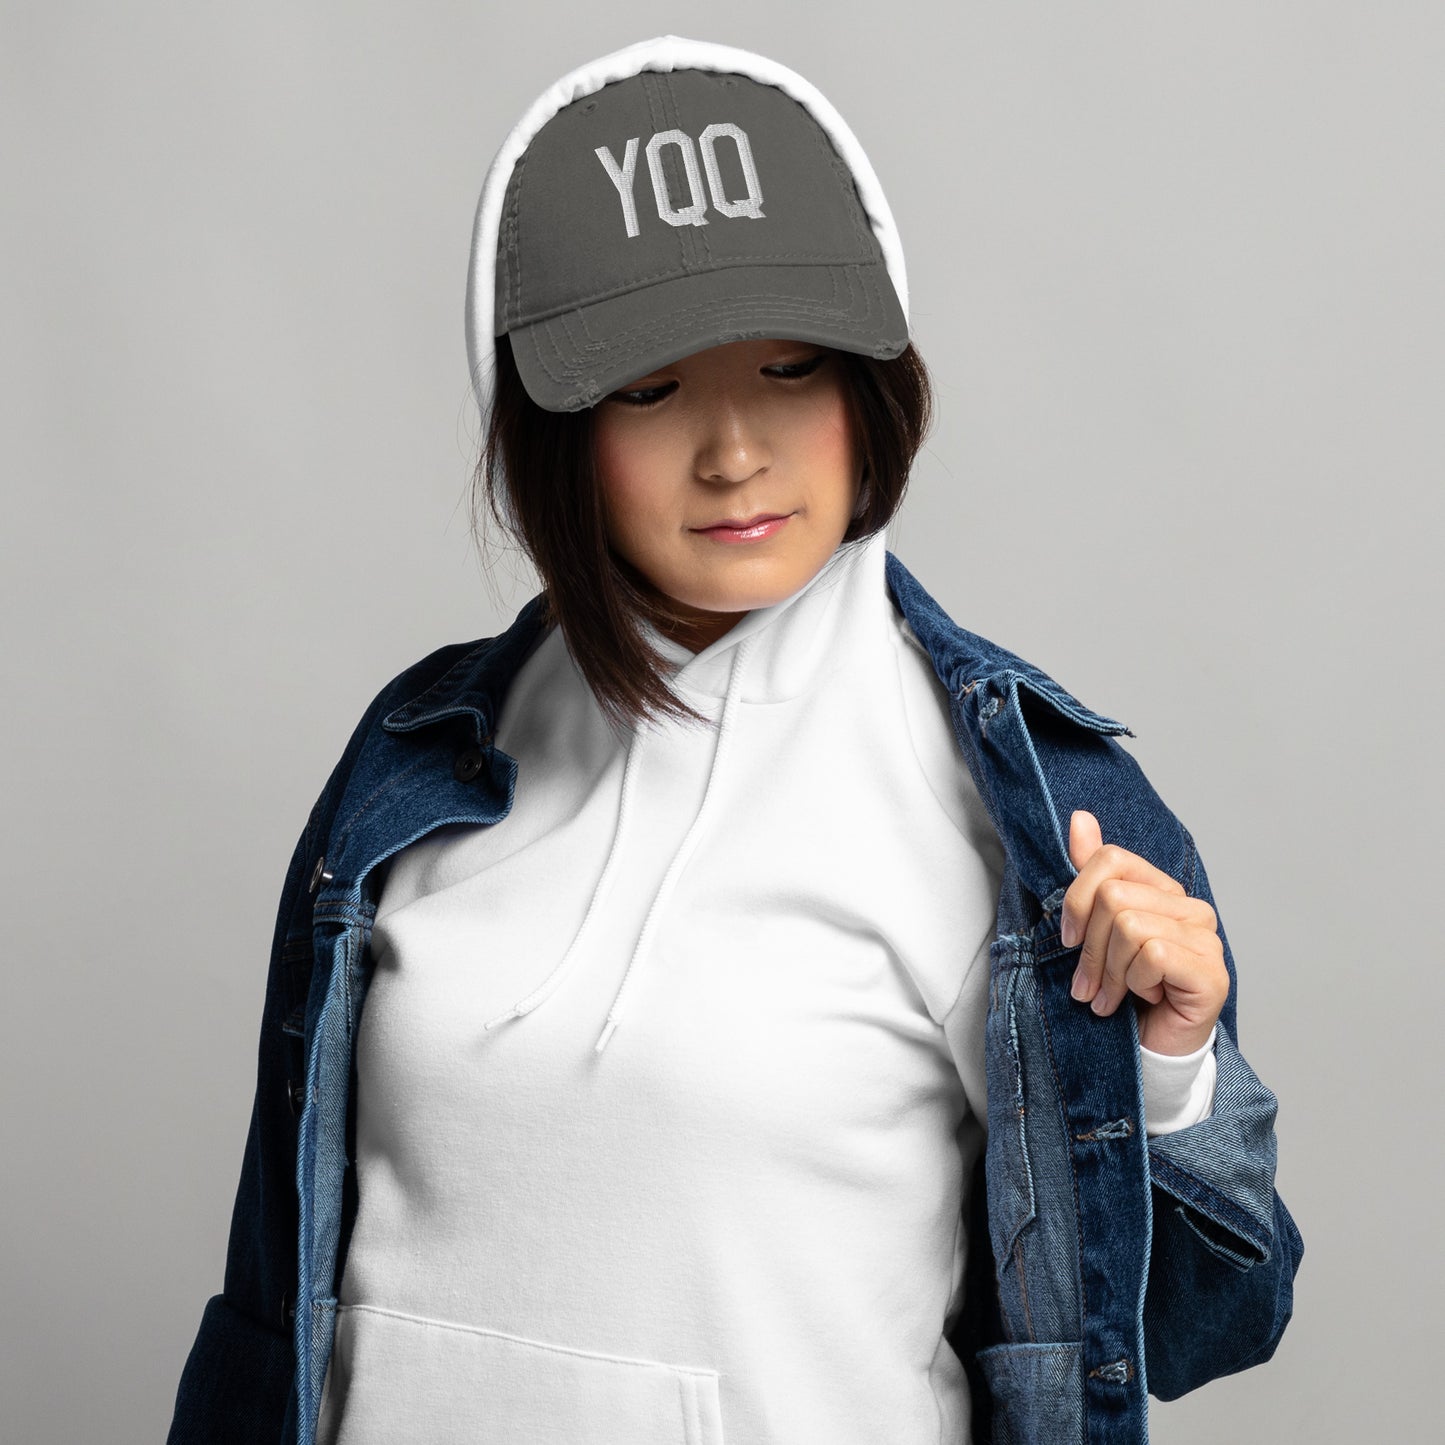 Airport Code Distressed Hat - White • YQQ Comox • YHM Designs - Image 06